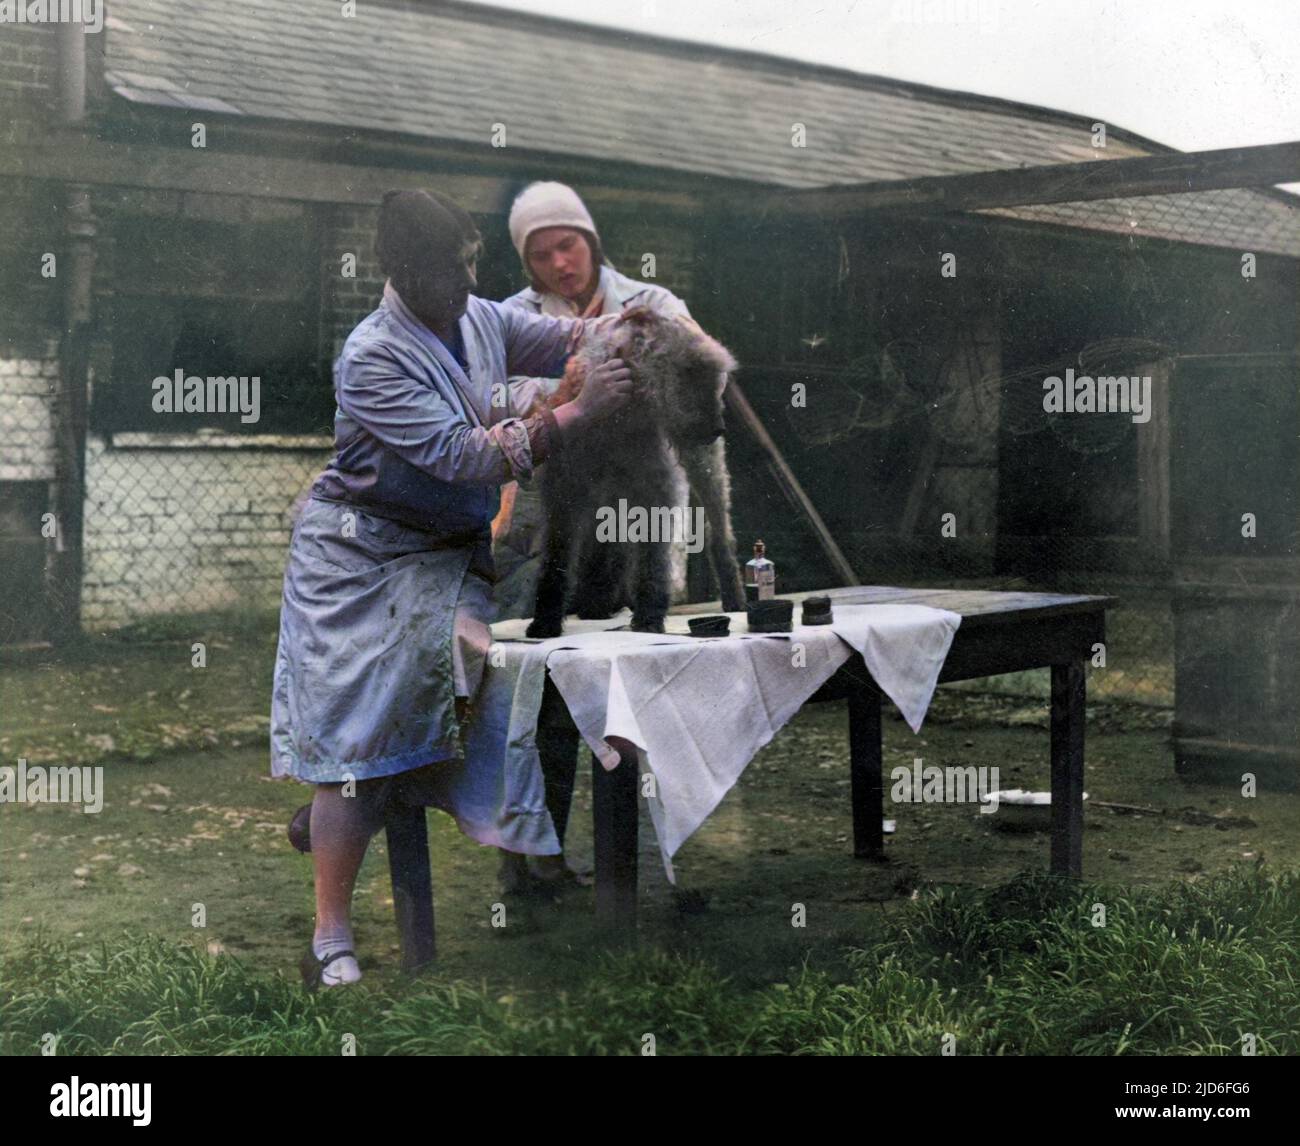 A lucky wire-haired terrier is groomed on a table by two women at a private dog 'hotel' (boarding kennel). Colourised version of : 10164904       Date: early 1930s Stock Photo